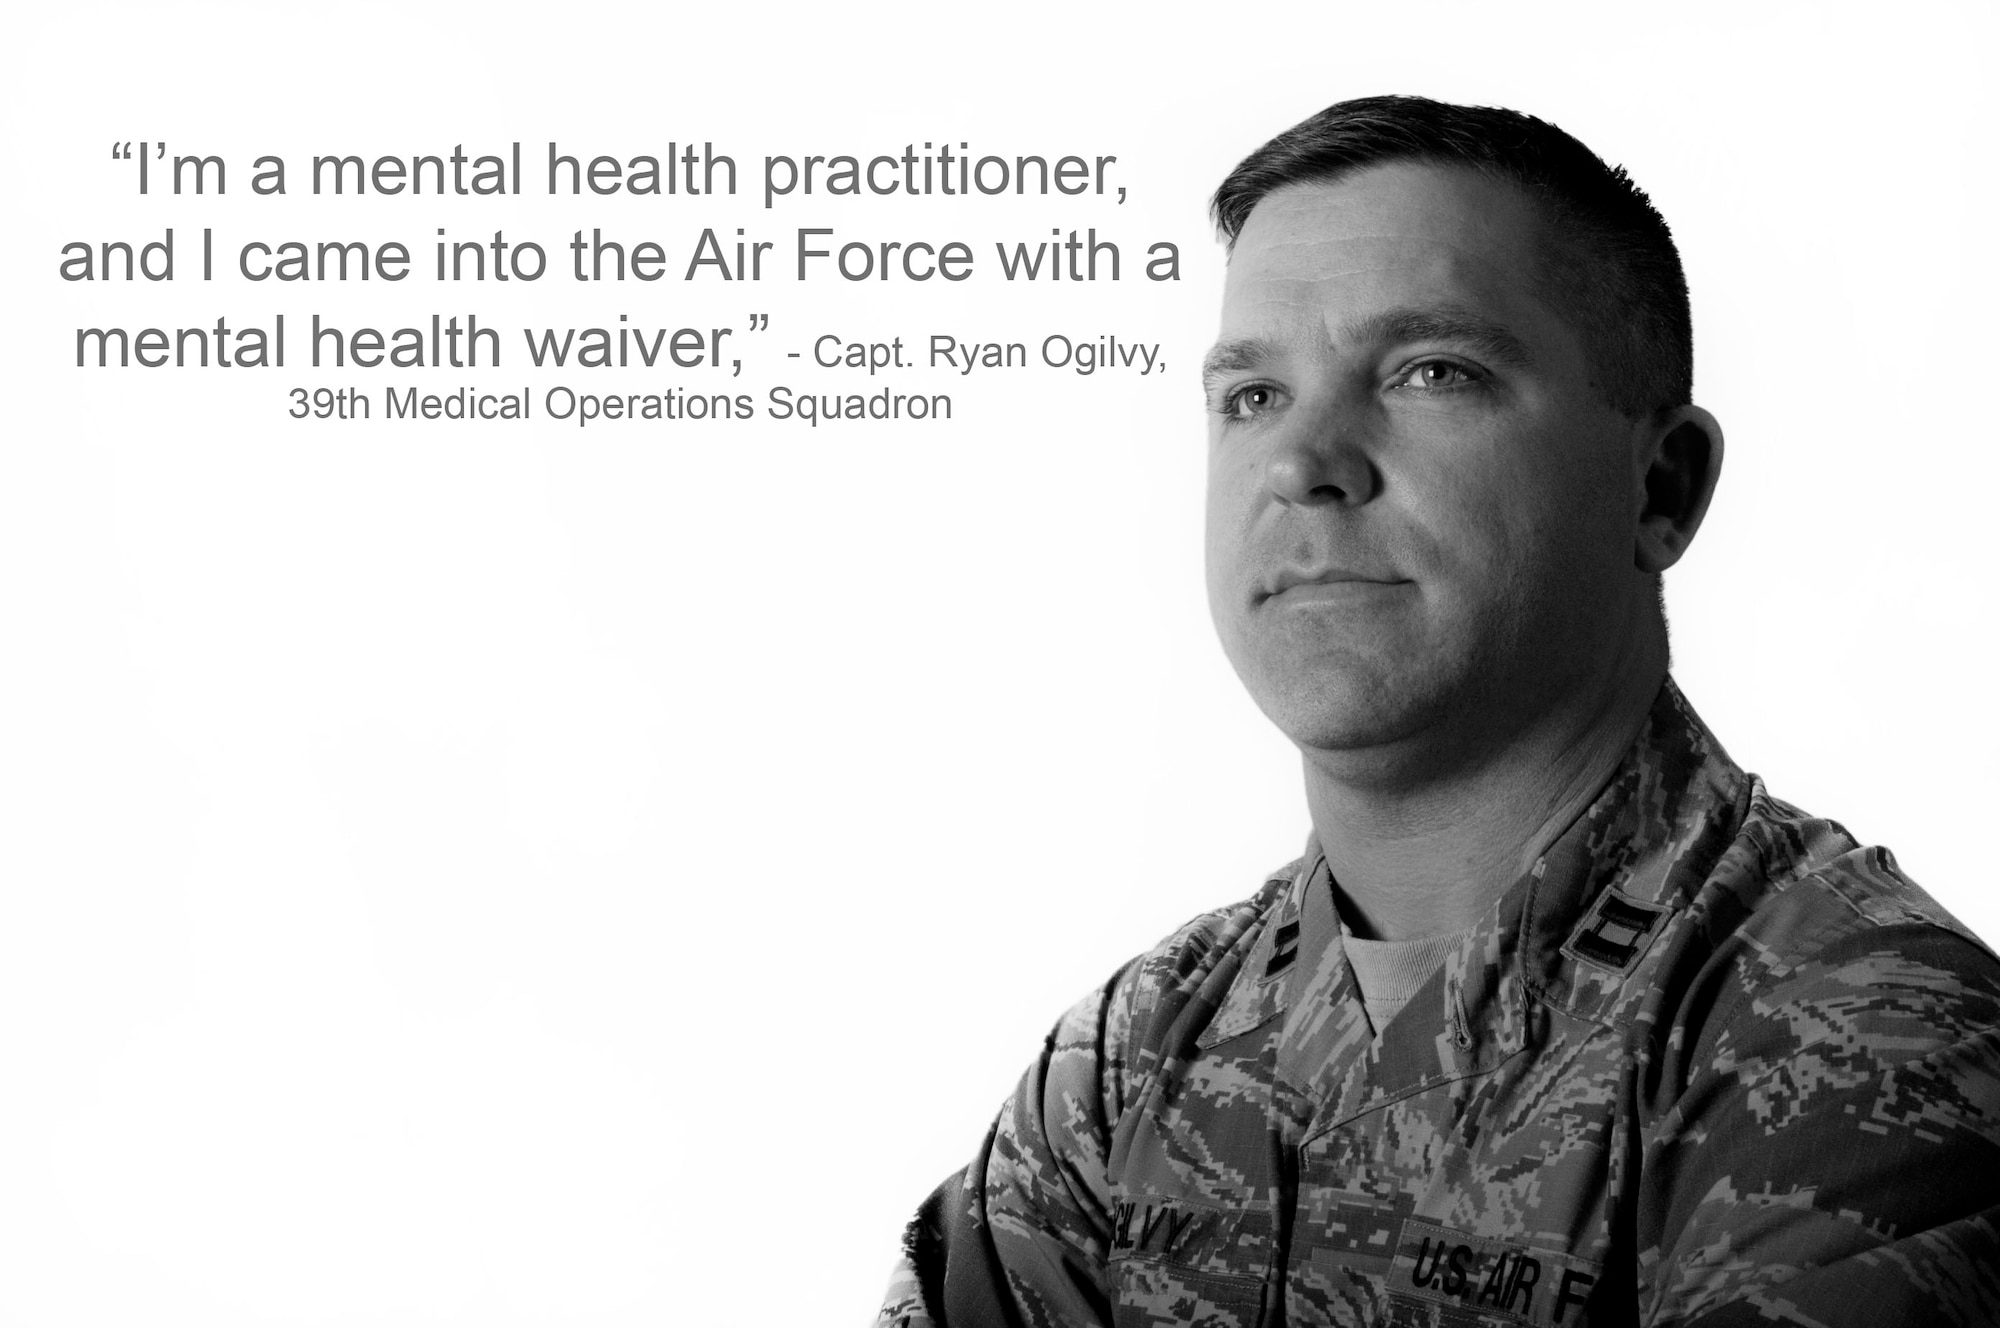 U.S. Air Force Capt. Ryan Ogilvy, 39th Medical Operations Squadron mental health practitioner, reflects on his career and how he joined the Air Force. Ogilvy, along with his flight, are responsible for assisting Airmen with mental health concerns. (U.S. Air Force photo illustration by Staff Sgt. Jack Sanders/Released)